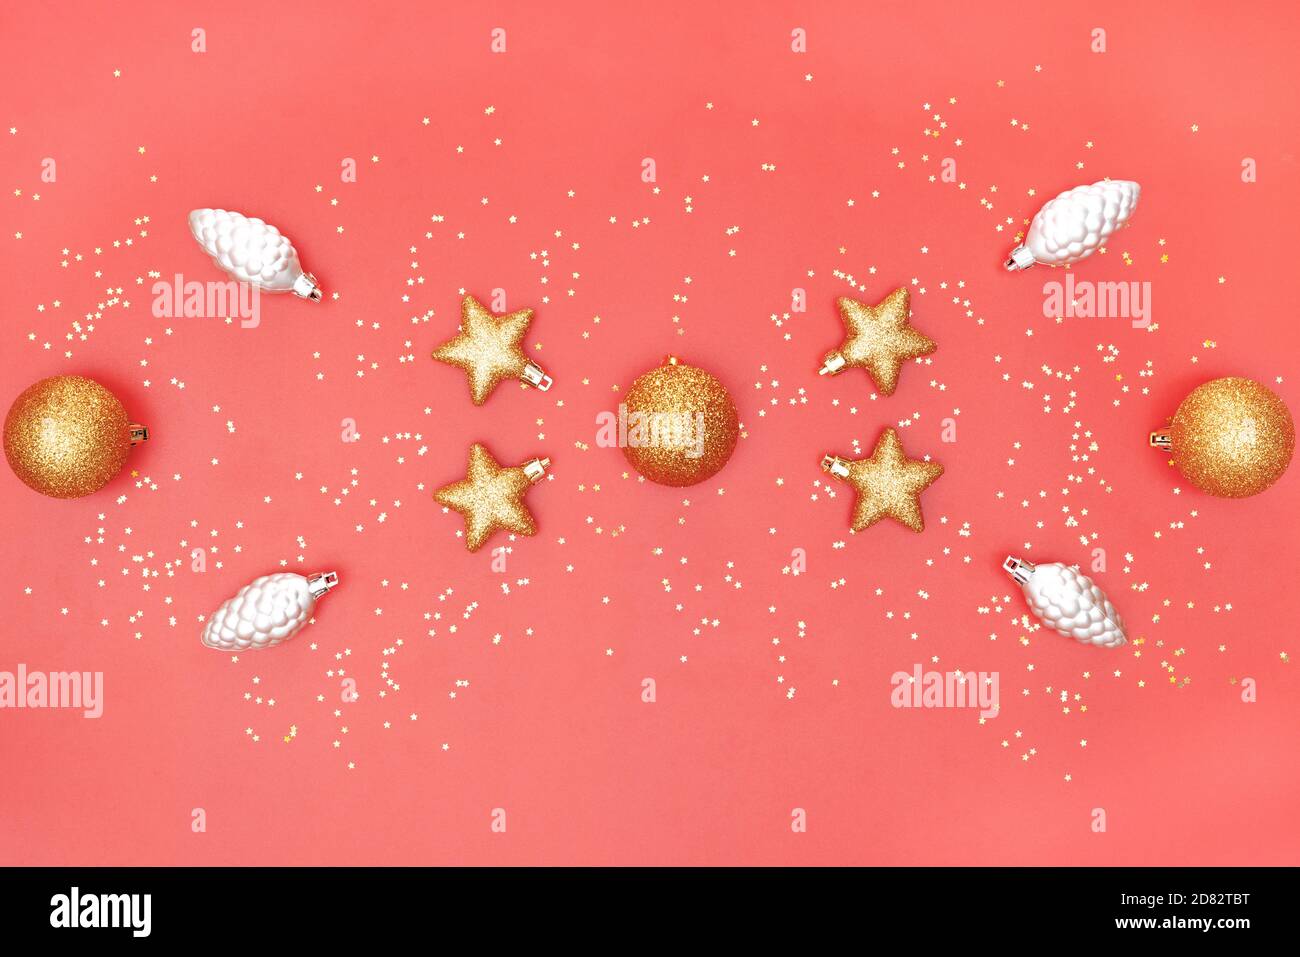 golden ball, star and bell on pink living coral background for birthday, christmas or wedding ceremony Stock Photo